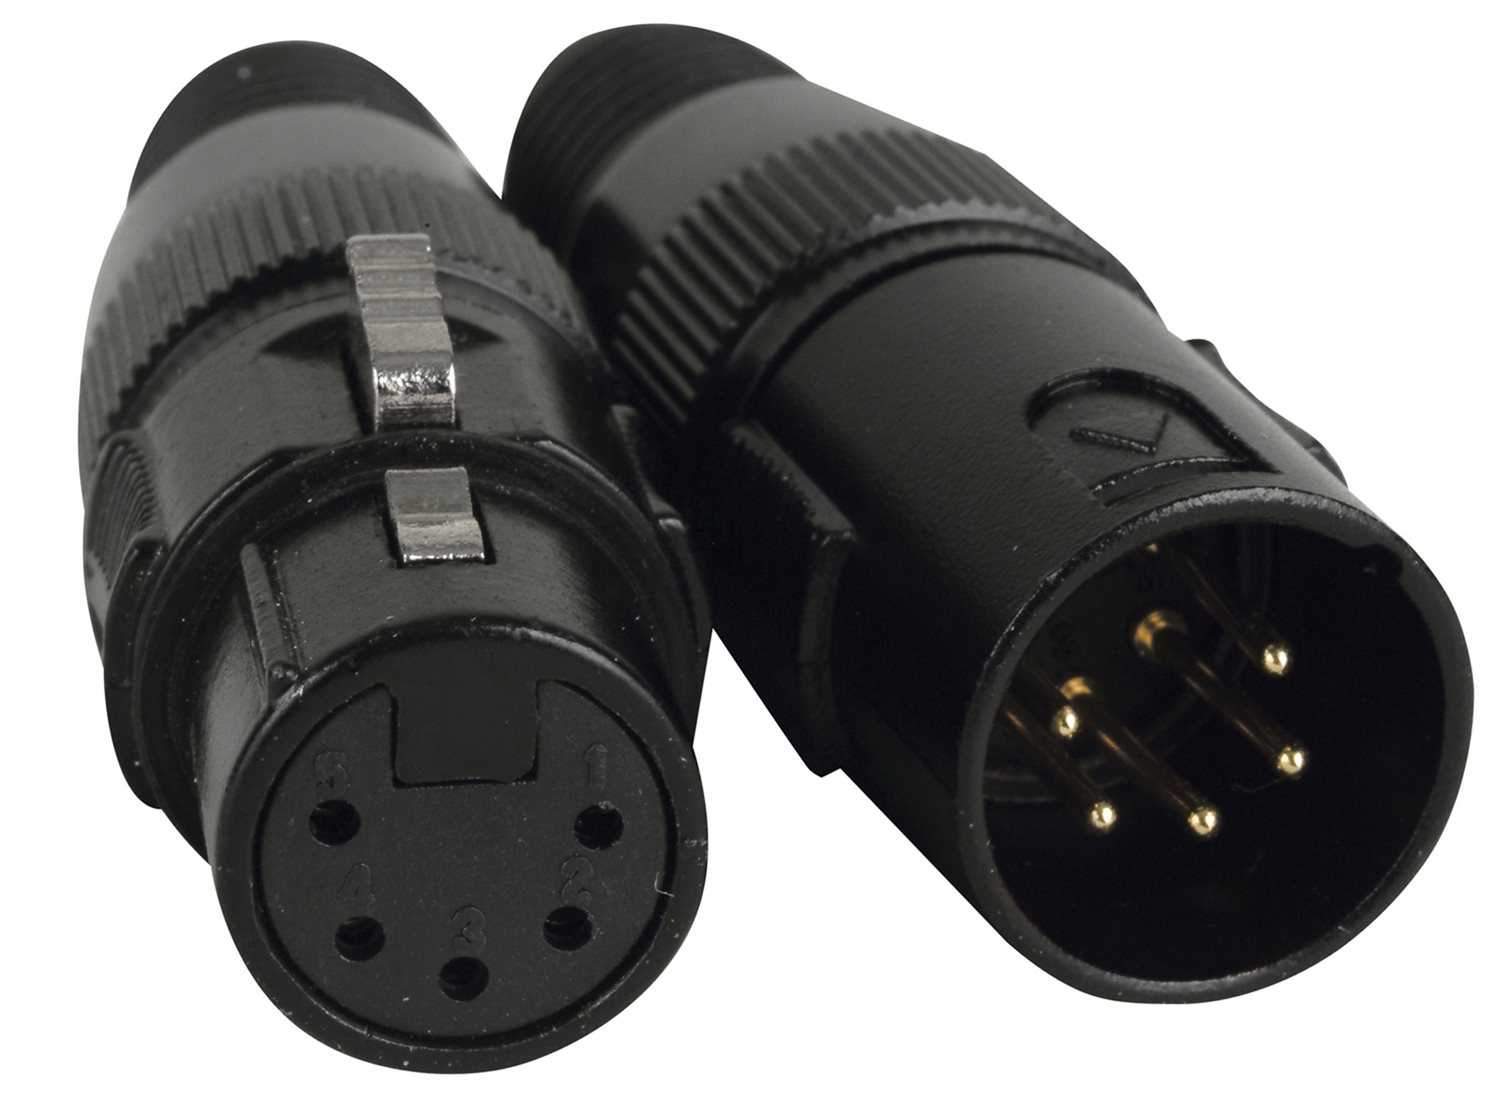 Accu-Cable 5 Pin Male Female DMX Connectors - ProSound and Stage Lighting